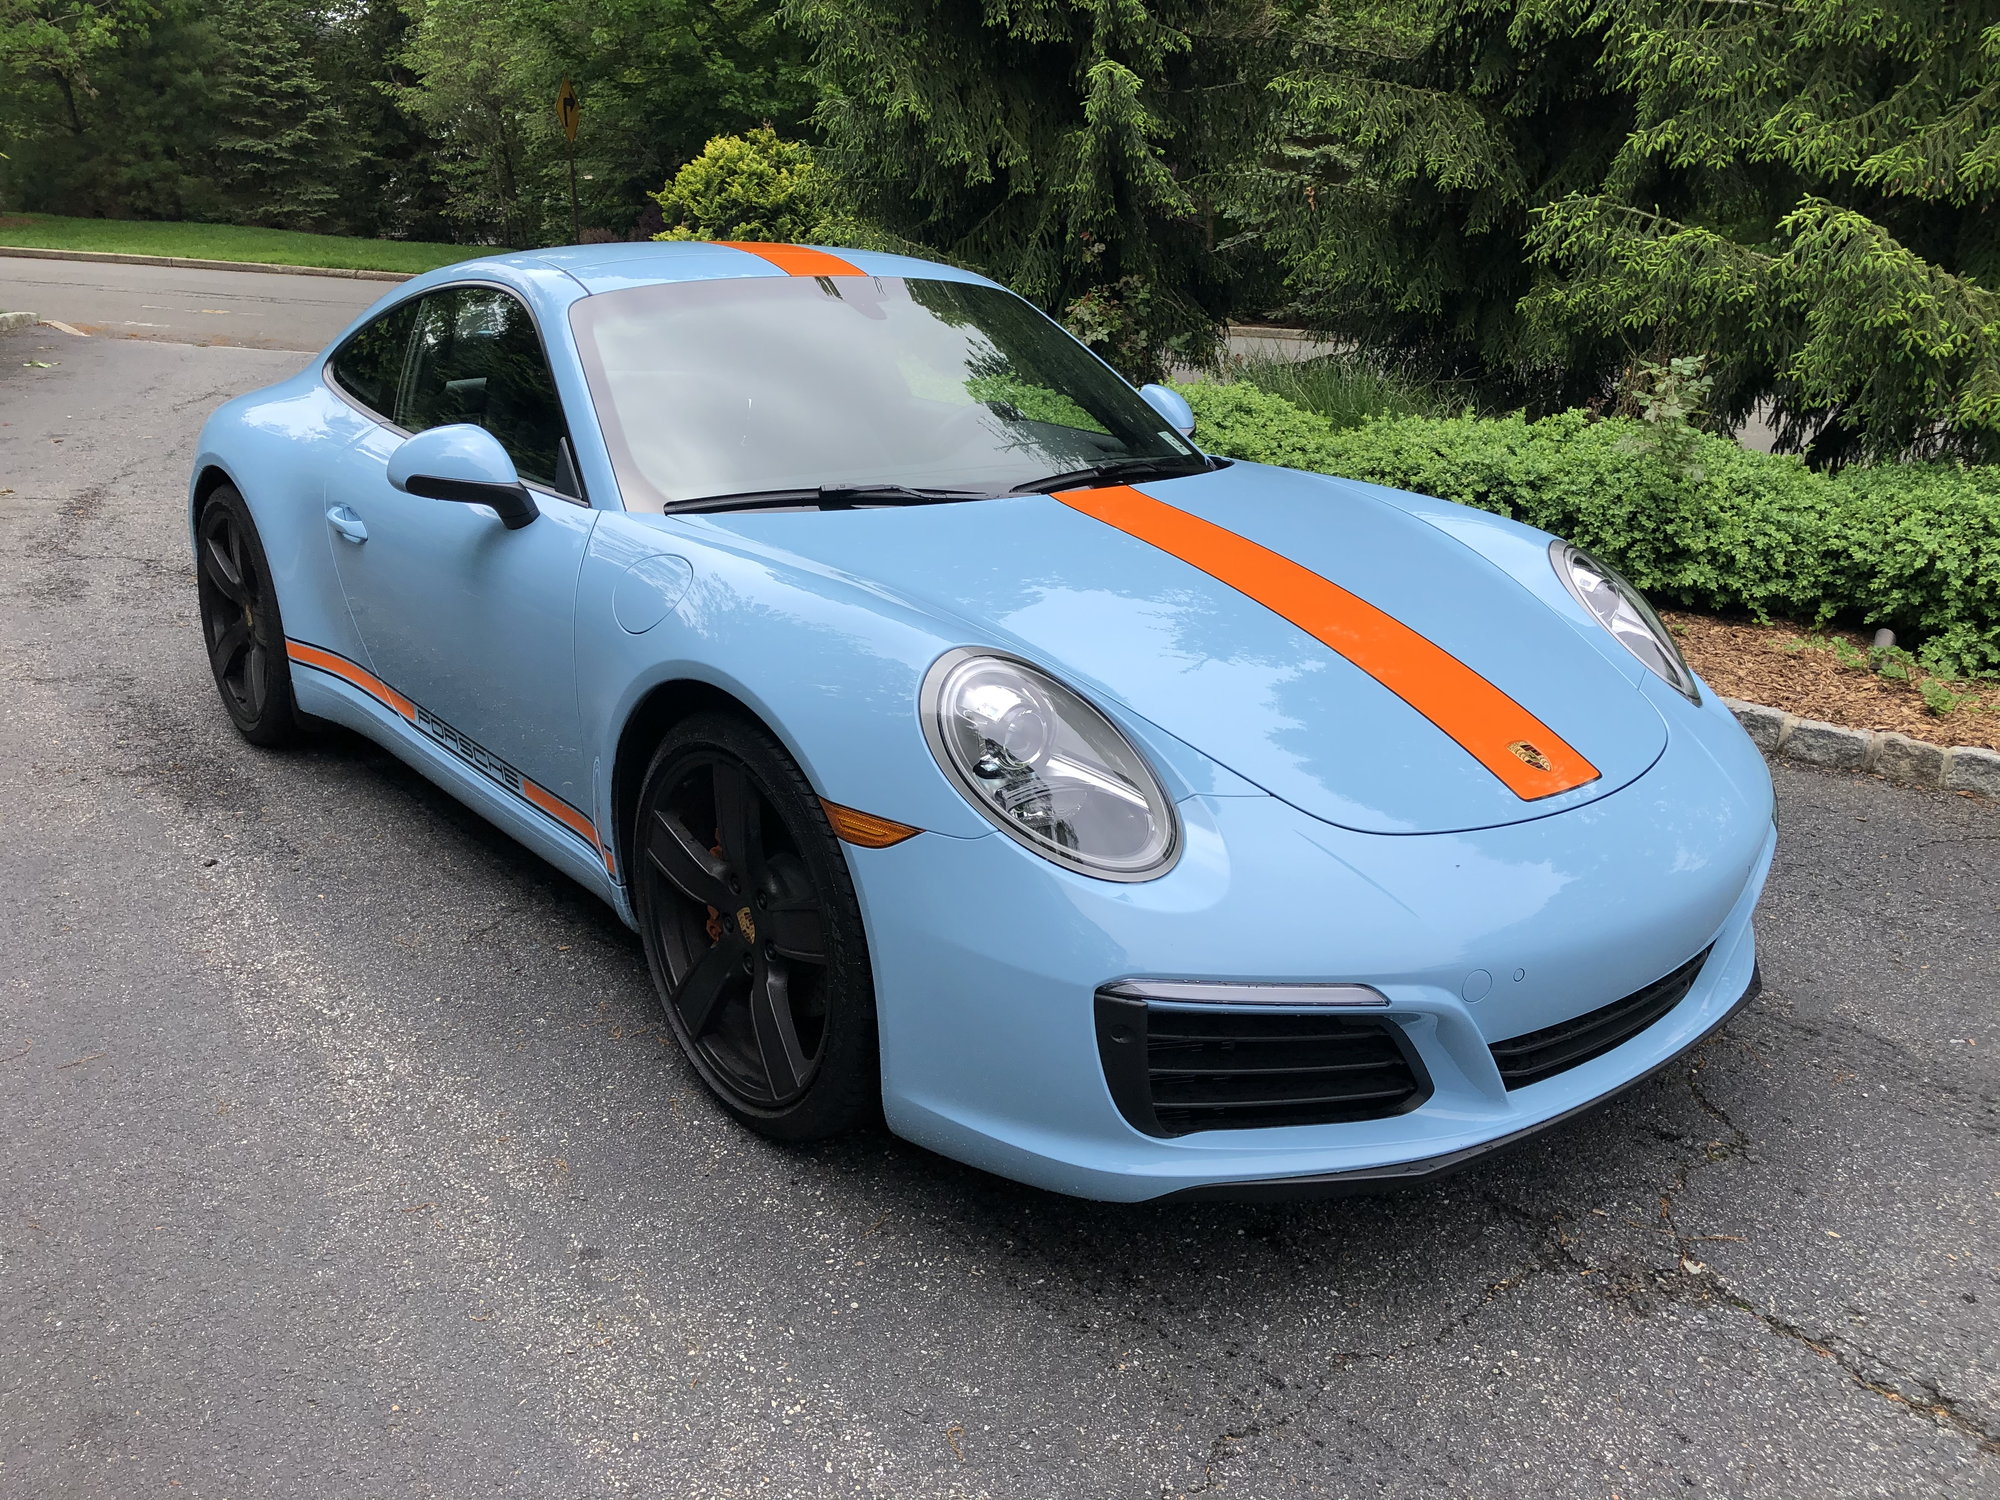 2017 Porsche 911 - 2017 Porsche Carrera, Gulf Blue, 4,100 miles - Used - VIN WP0AA2A92HS108405 - 4,100 Miles - 6 cyl - 2WD - Automatic - Coupe - Blue - Franklin Lakes, NJ 07417, United States